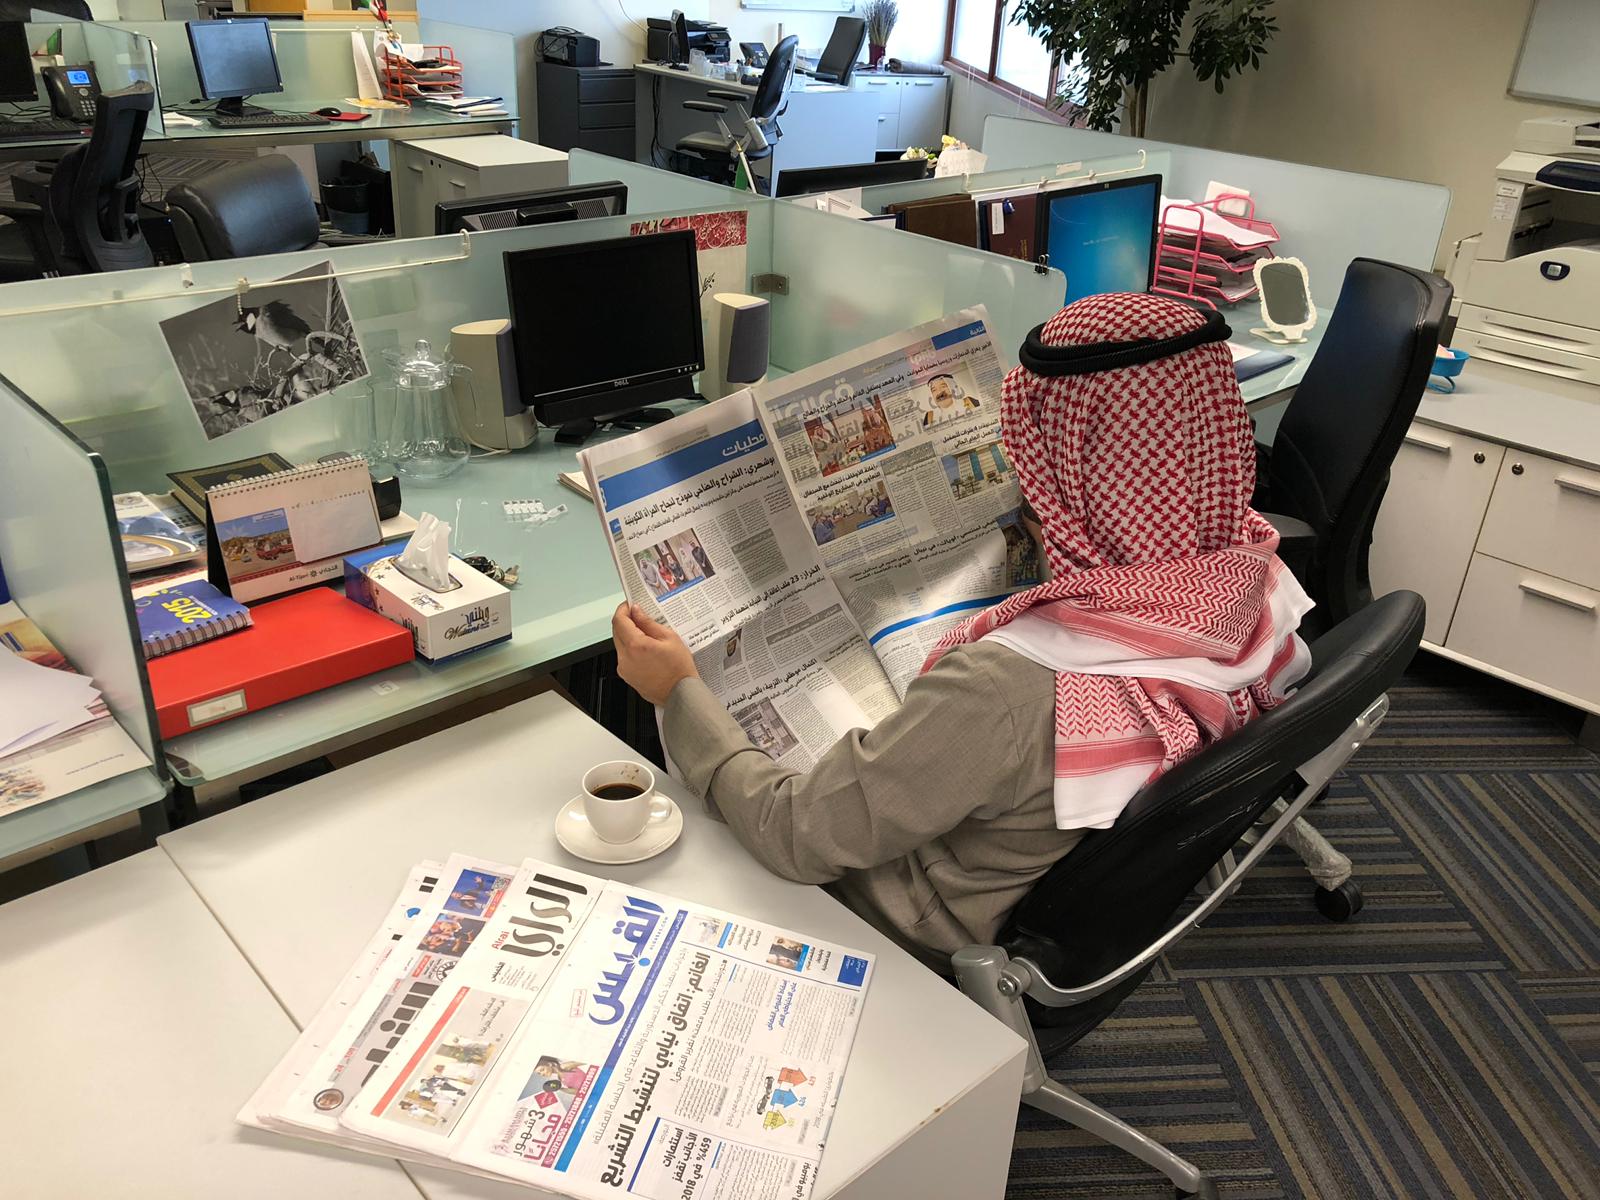 Reading newspapers while drinking morning coffee is considered a weekend ritual to many people